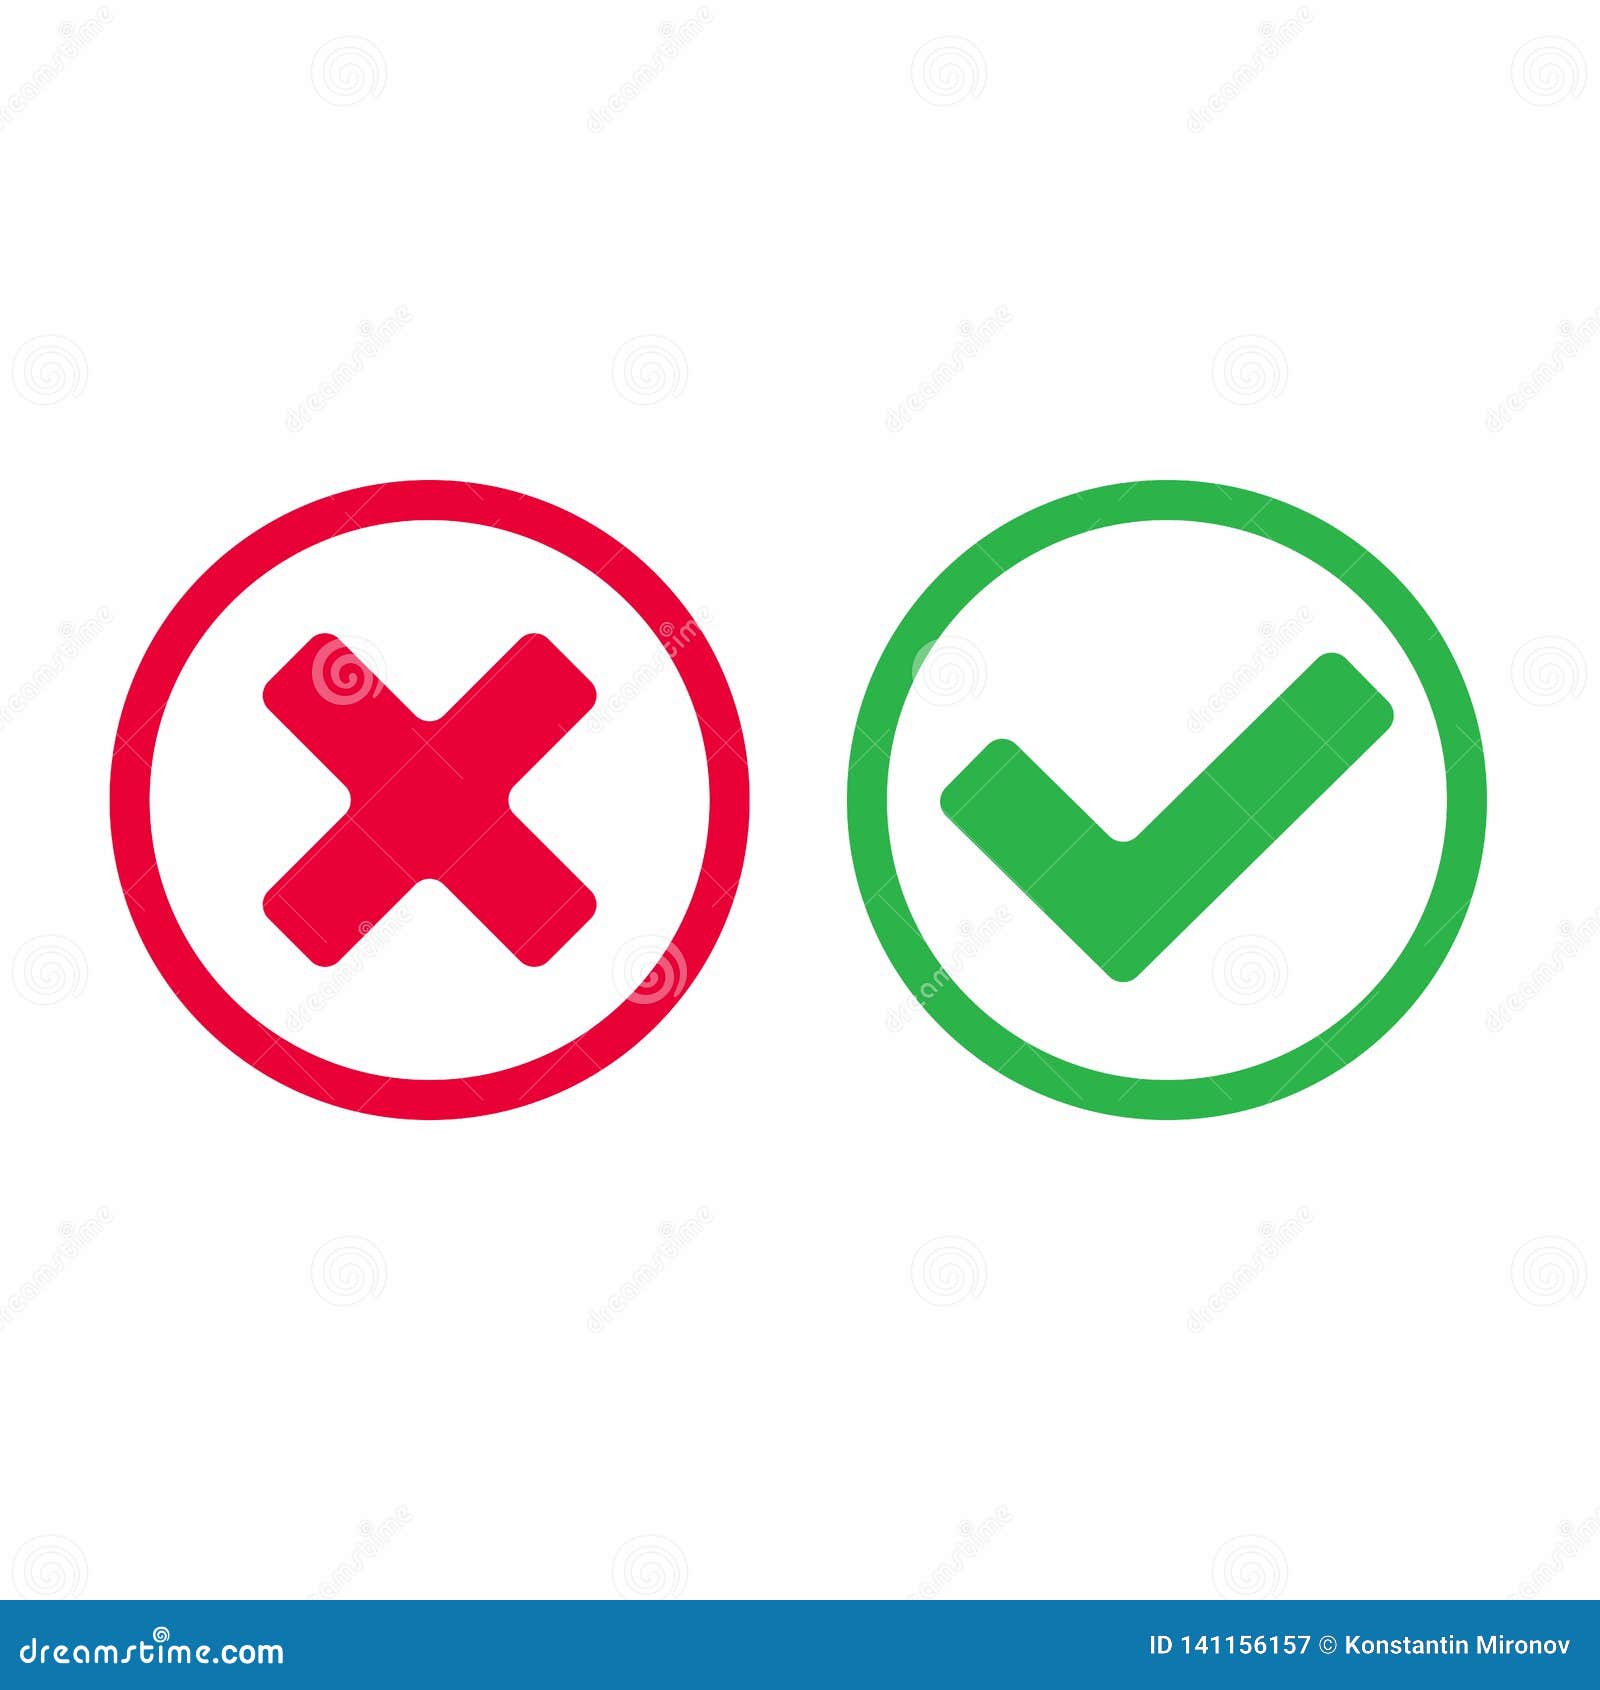 check mark icon signs  . yes or no, right and wrong flat  version of check mark buttons.